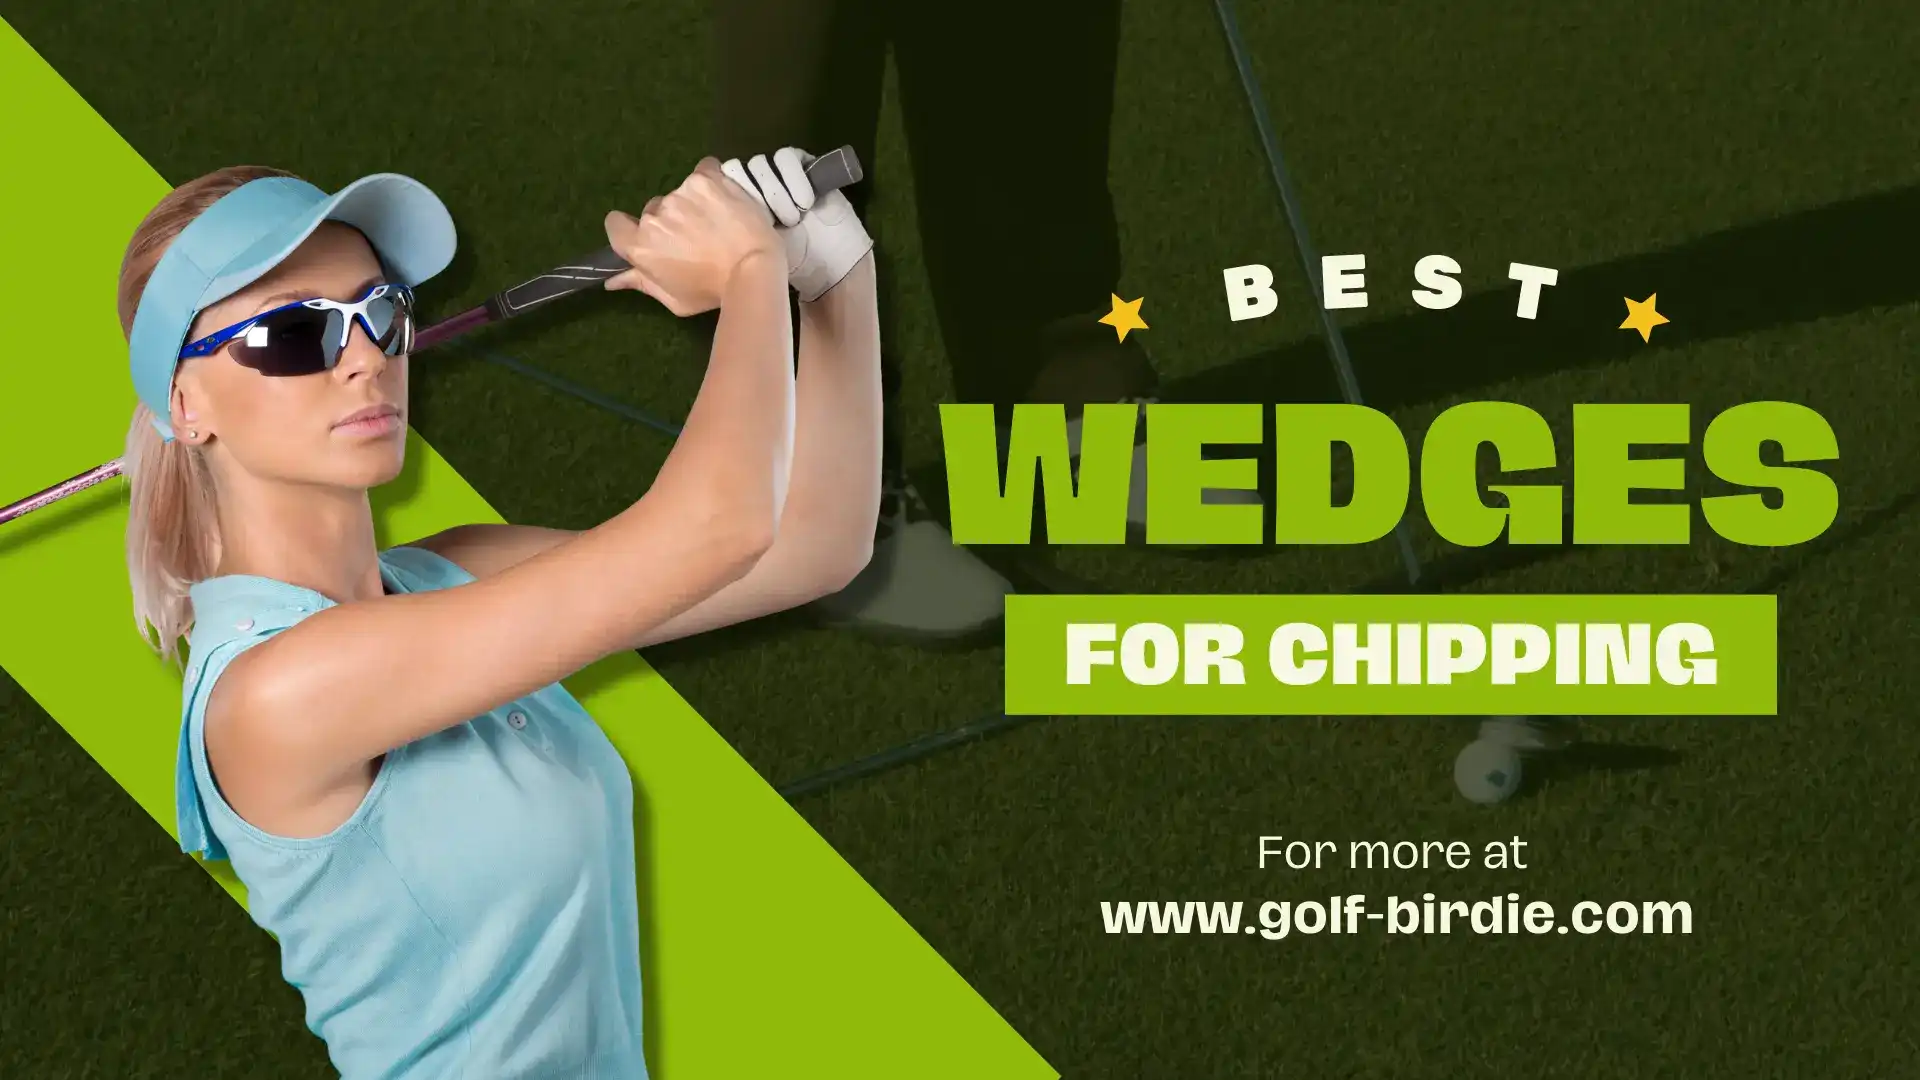 Best Wedges for Chipping